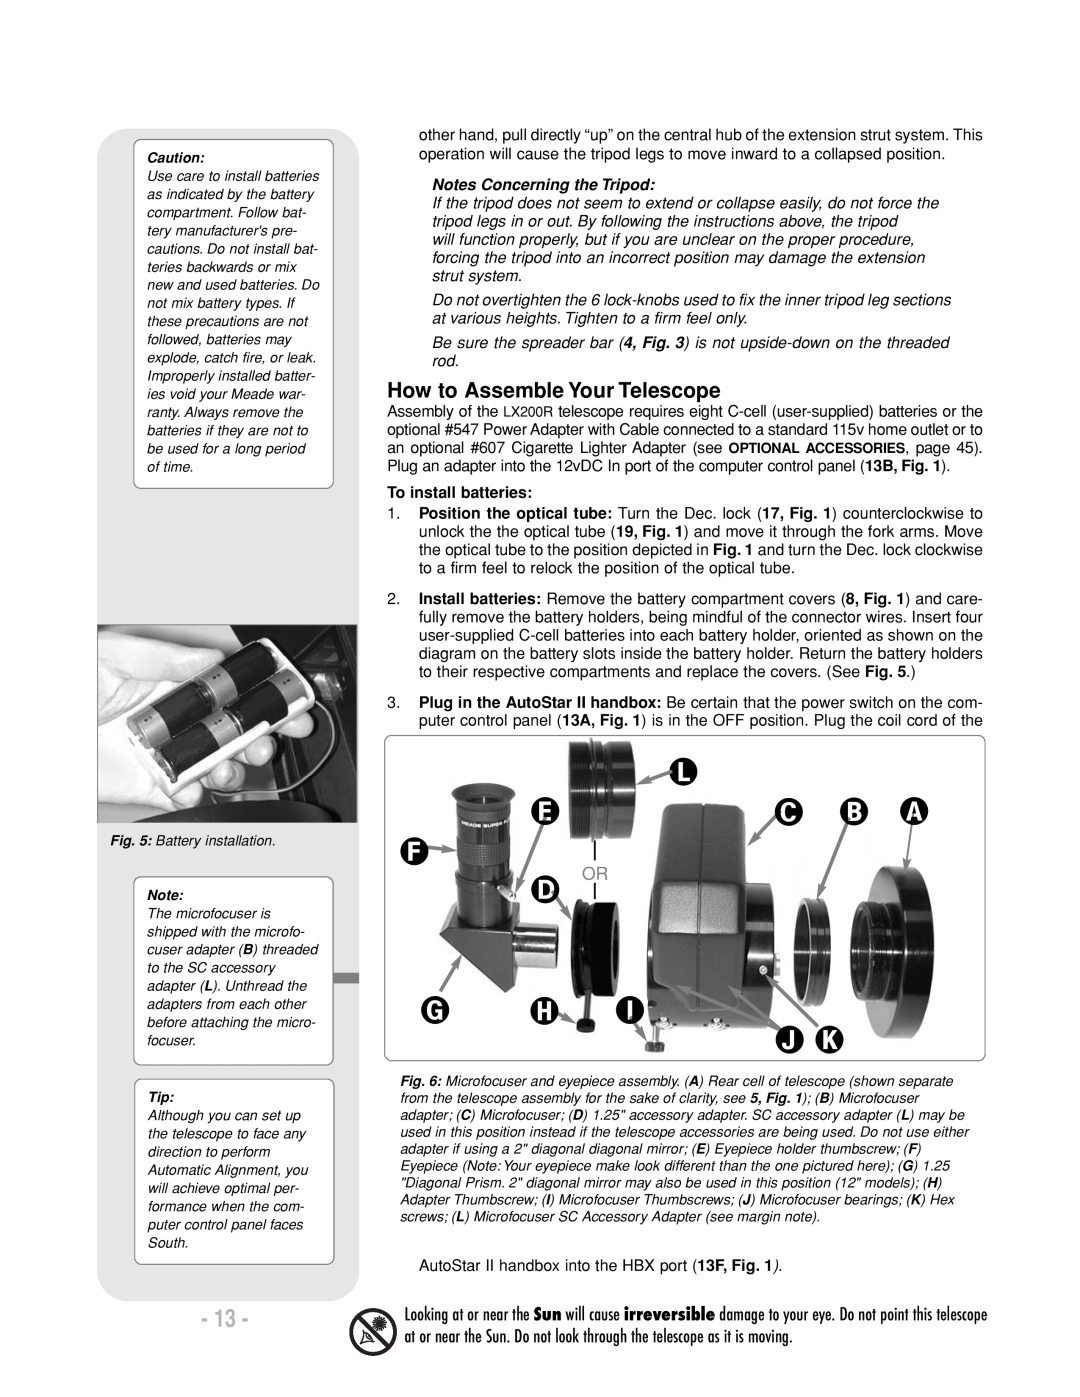 Meade LX200 R instruction manual How to Assemble Your Telescope, Notes Concerning the Tripod, To install batteries 